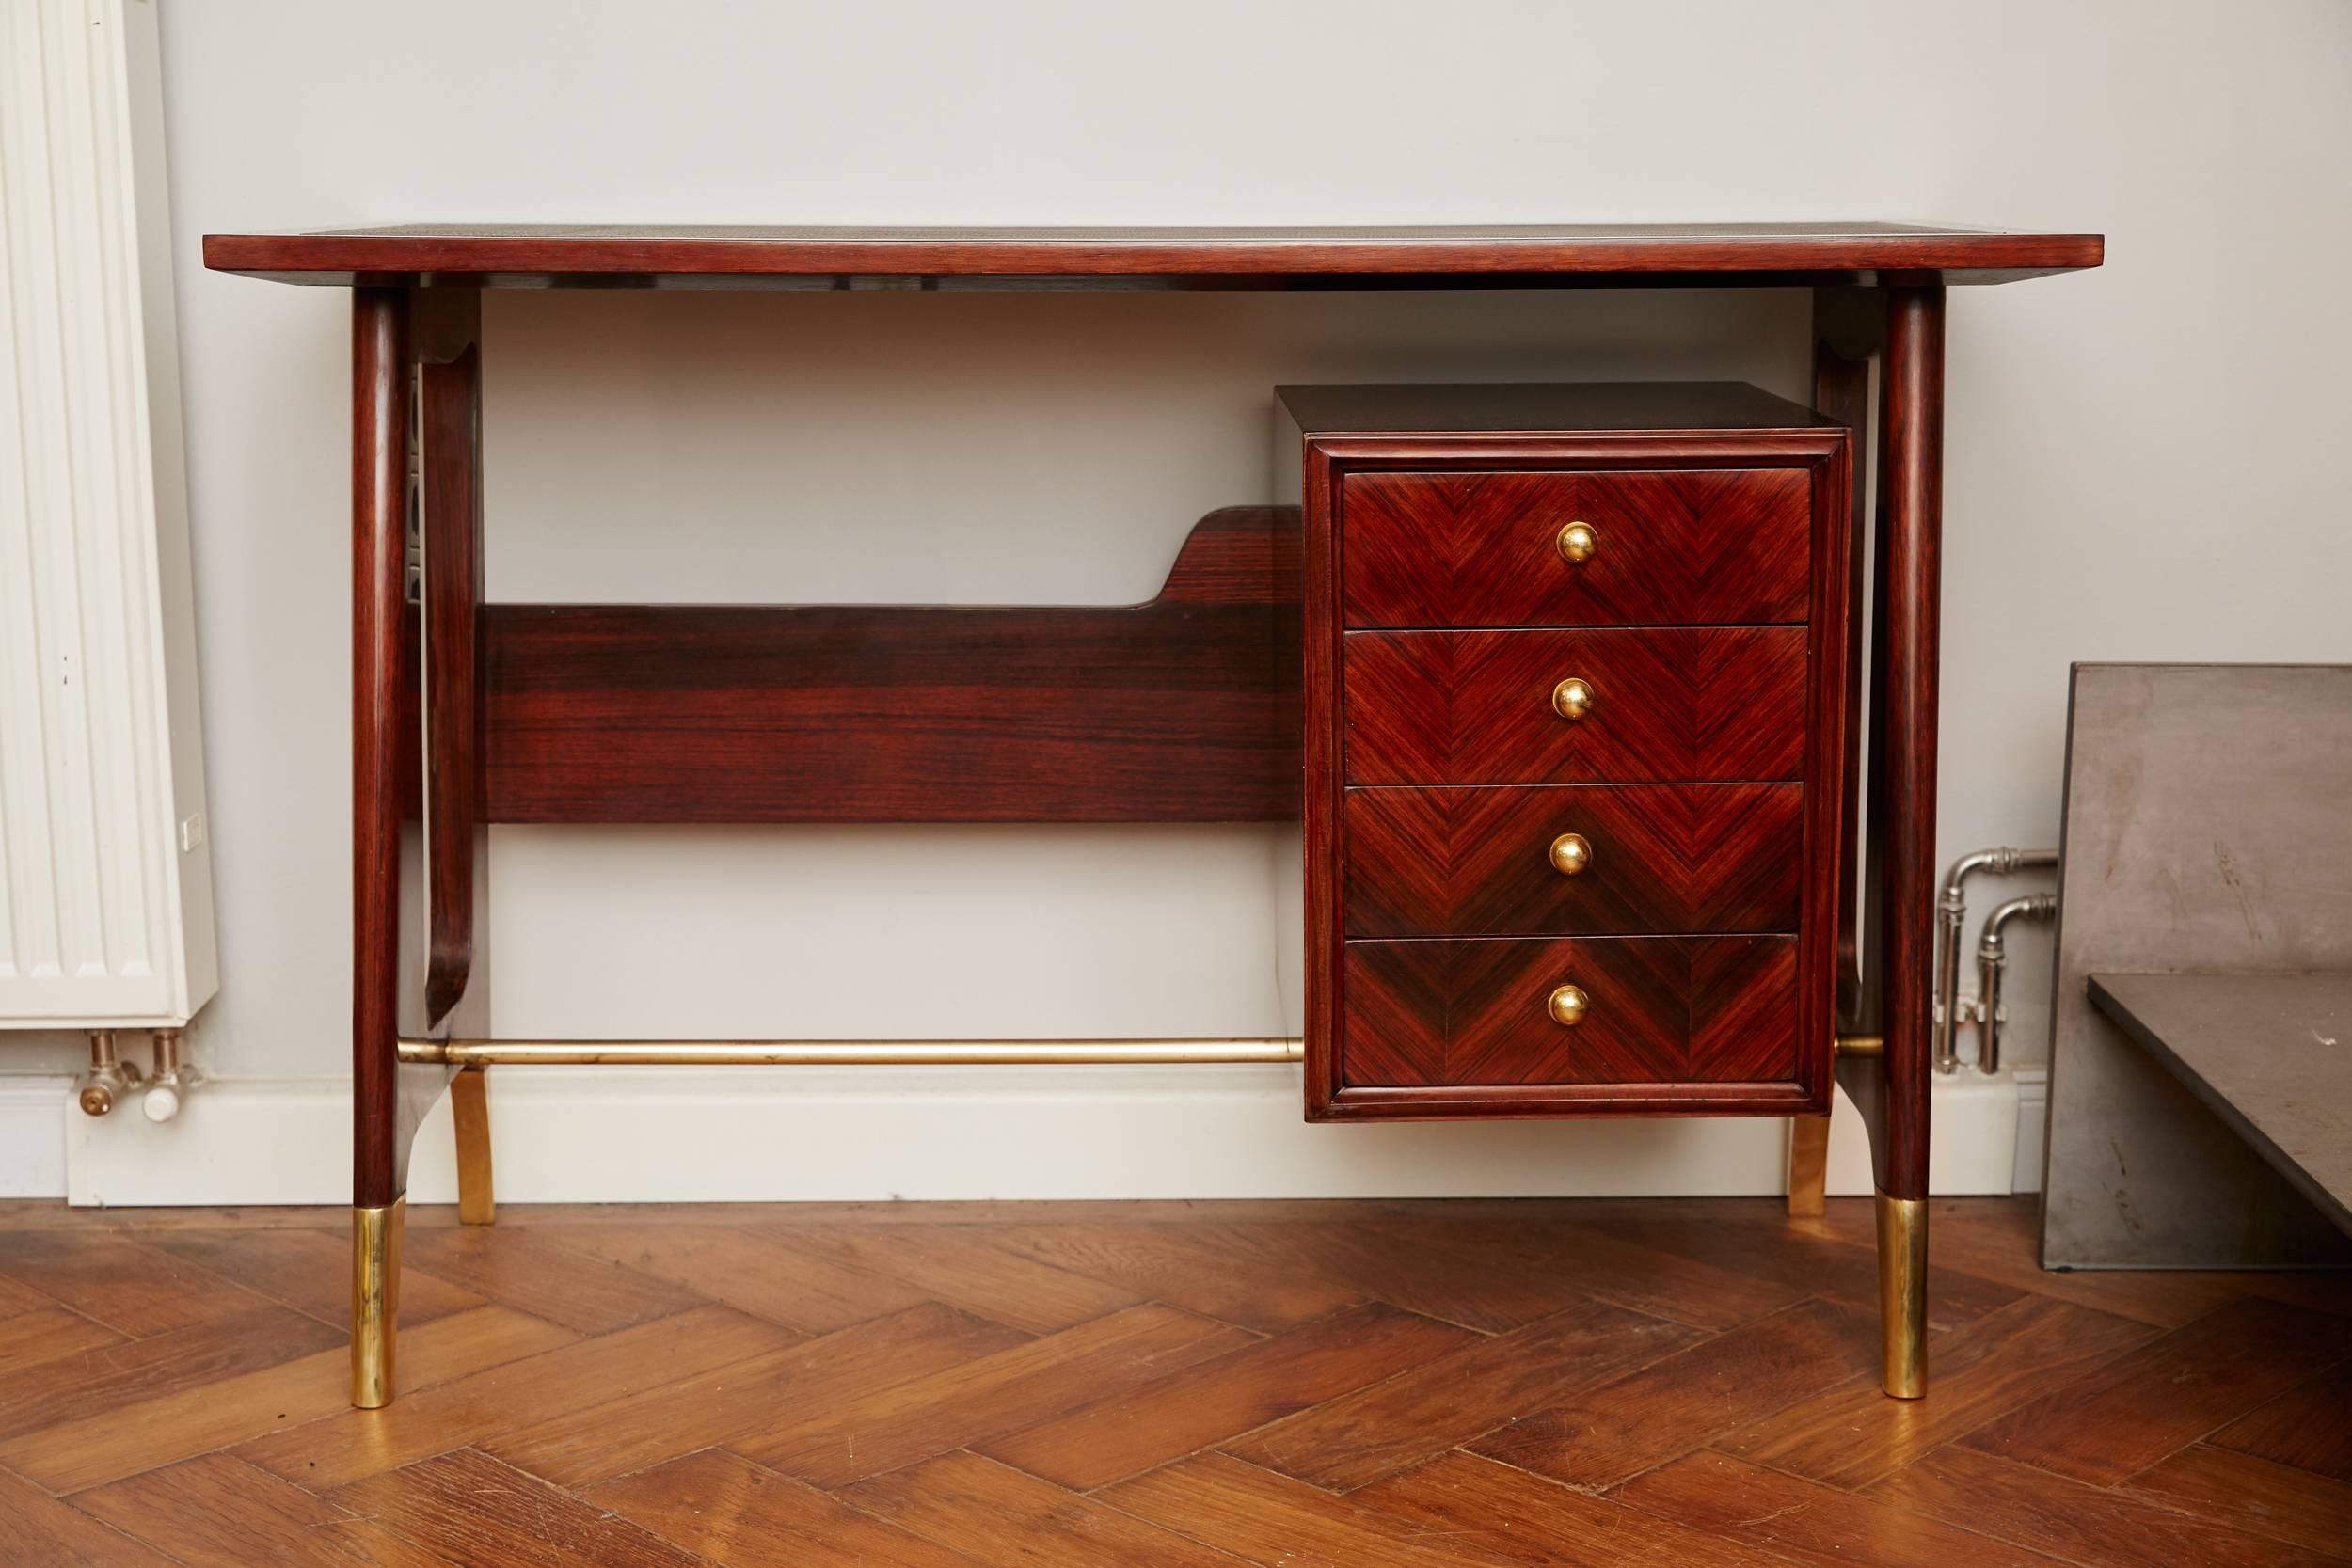 Elegant Writing Desk, Italy circa 1950, attr. to Ico Parisi, Santos rosewood polished, solid brass legs, brass rod, four drawers with brass ball handles elegant organic shaped side panels, brown leather writing tabletop. Perfect restored! 